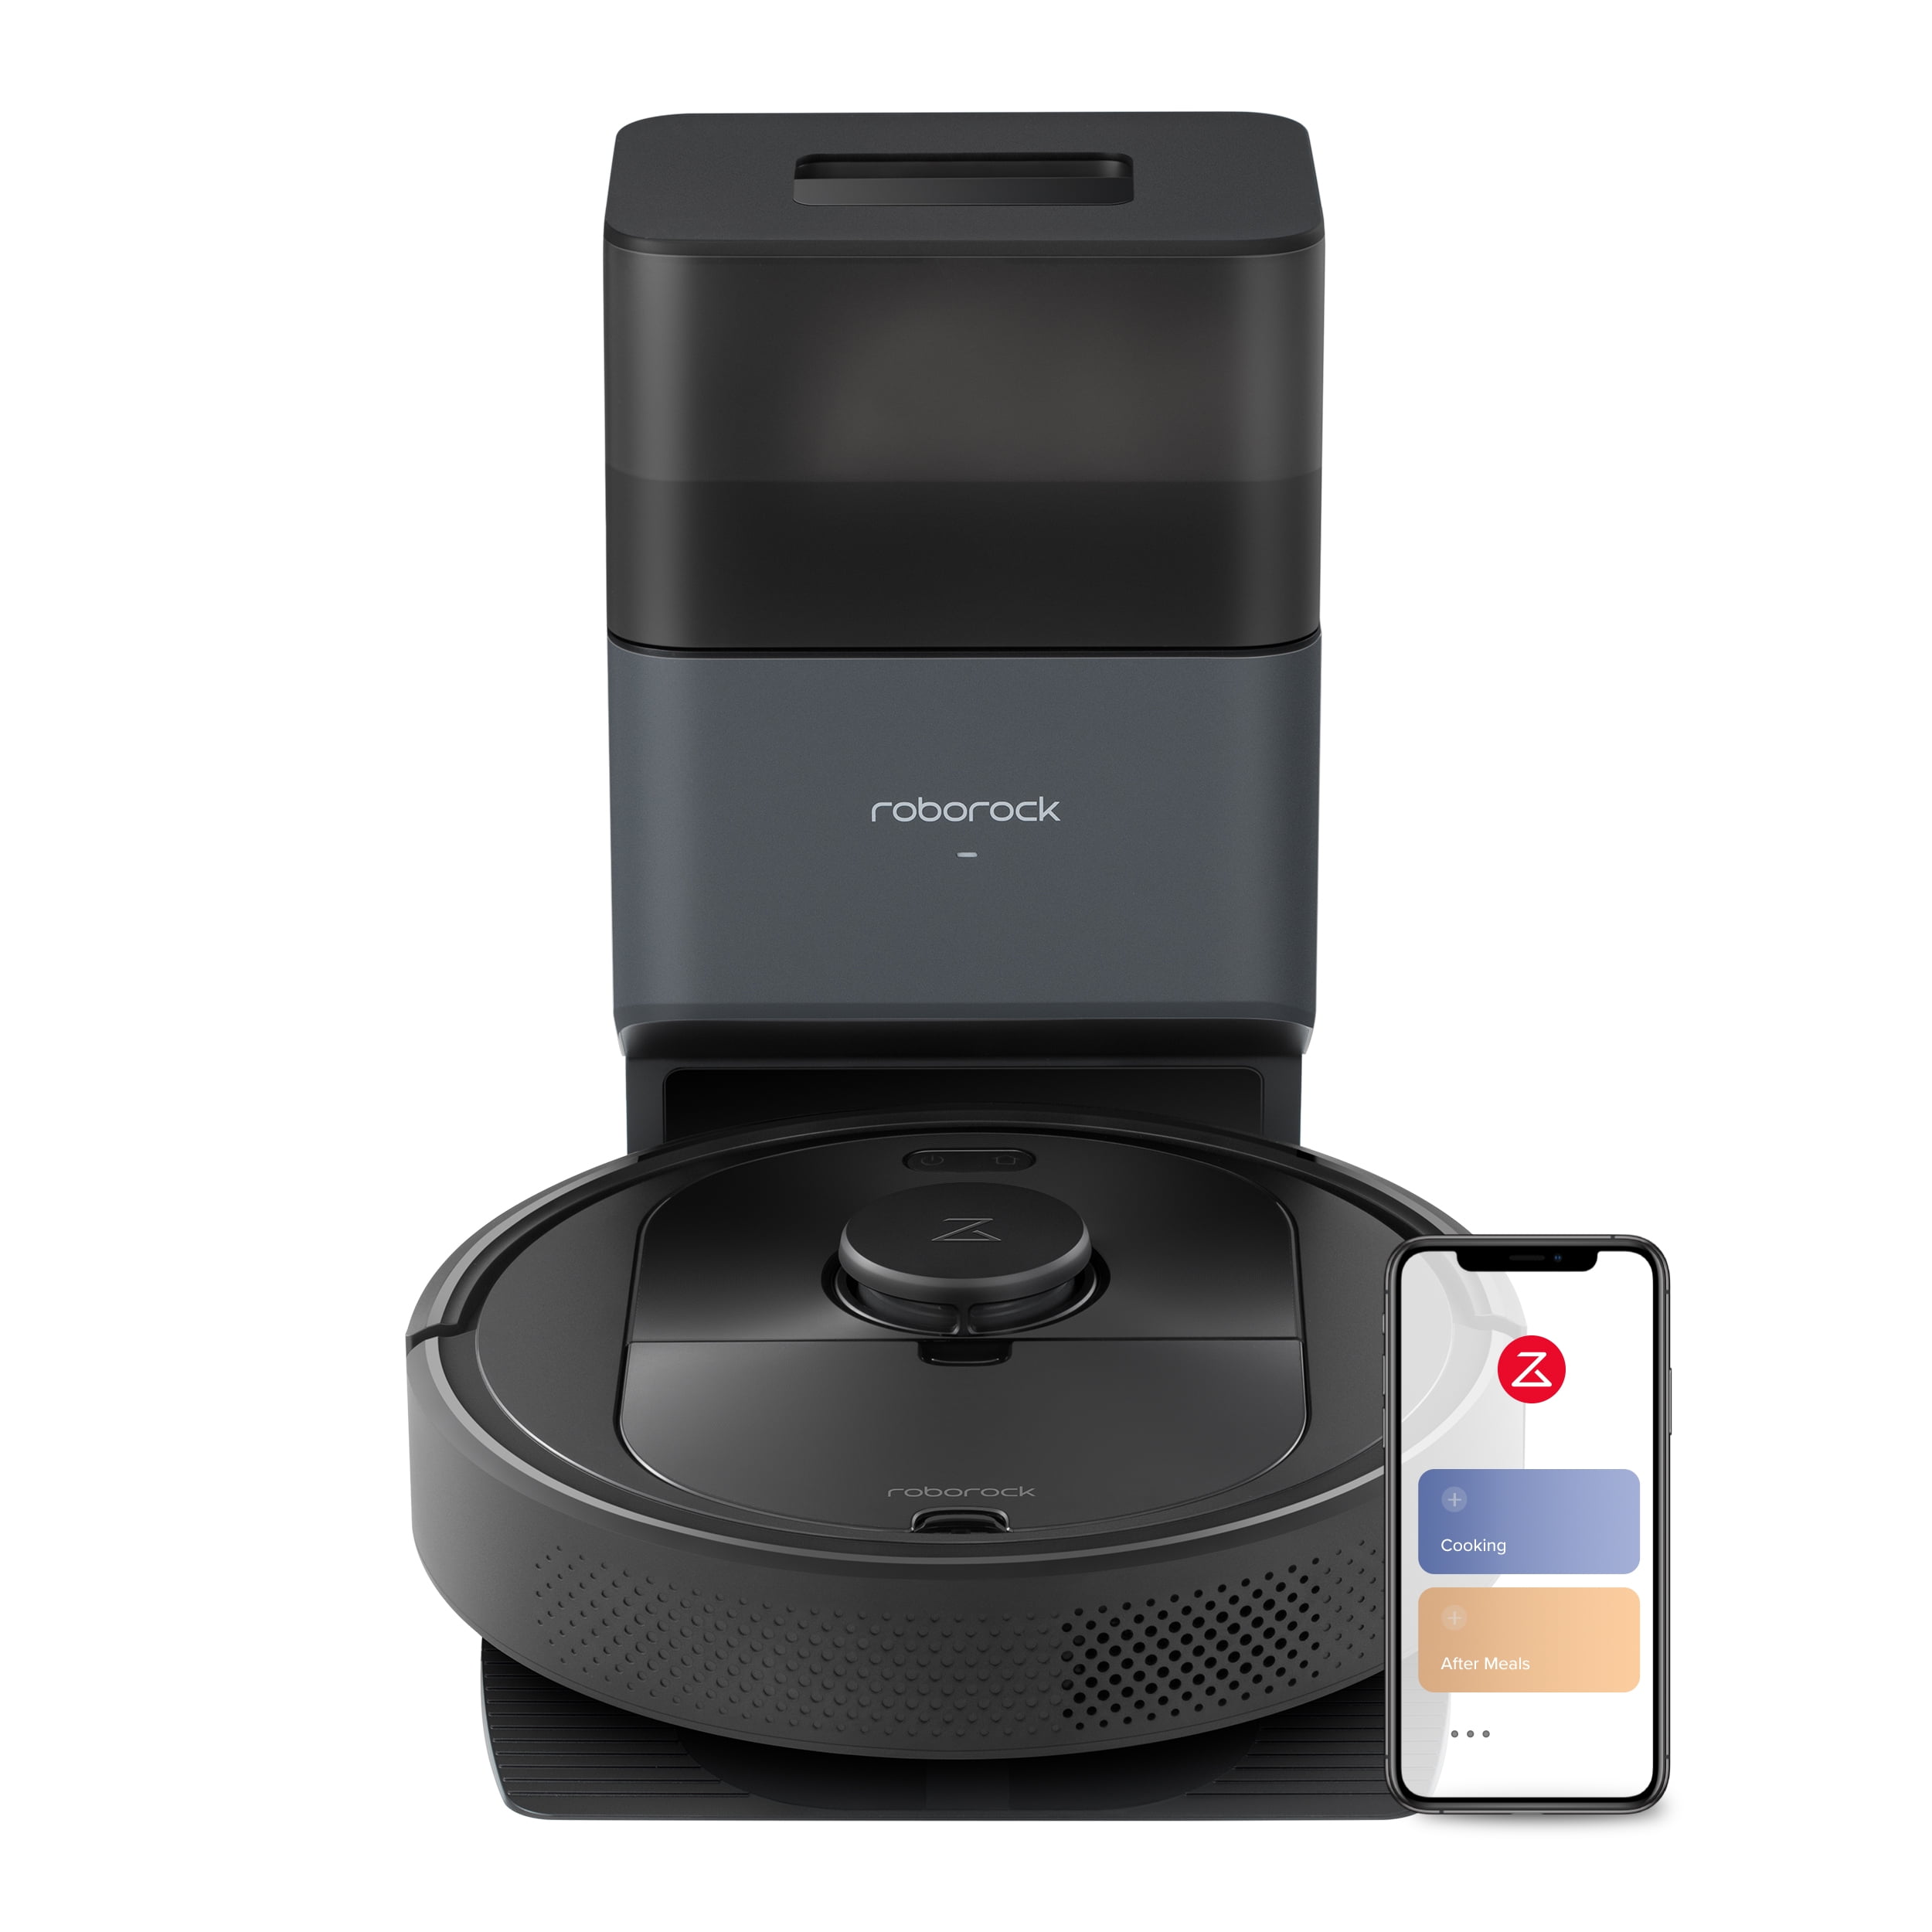 Save $300 on Roborock Q5+ Cleaner with 7-Week Hands-Free Cleaning